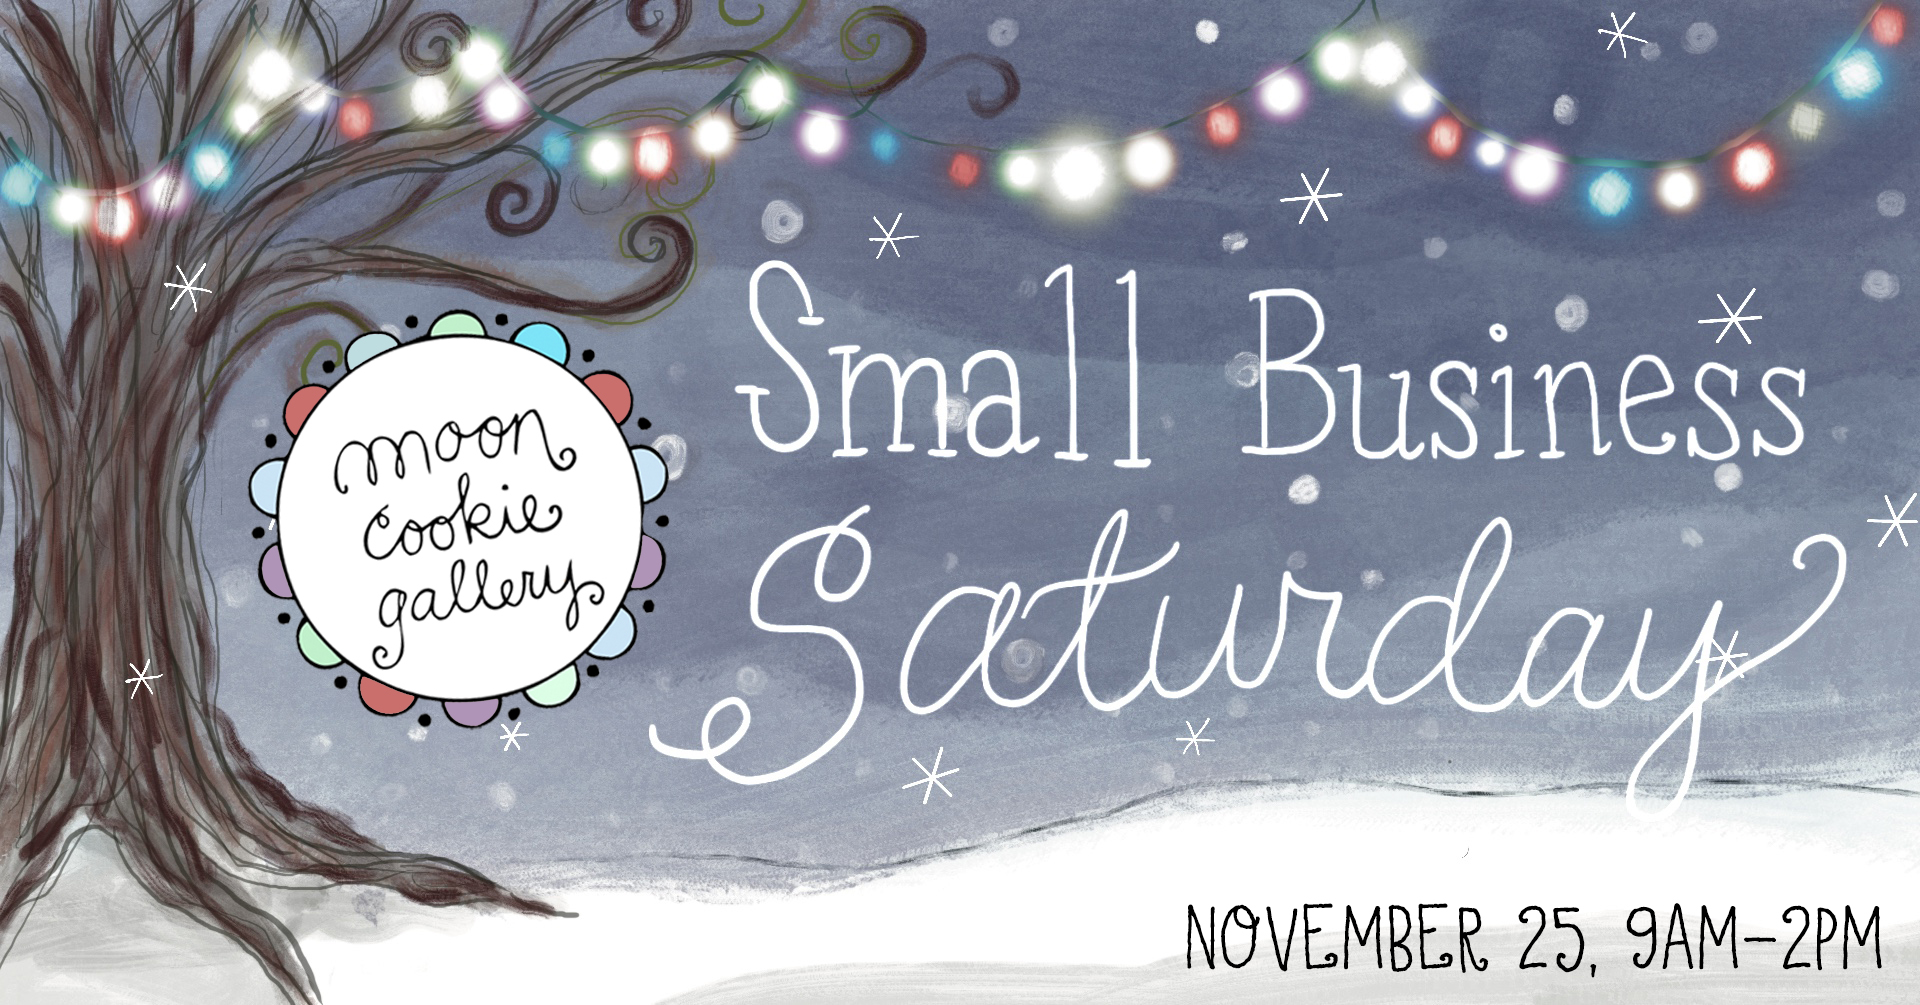 Small Business Saturday at Moon Cookie Gallery